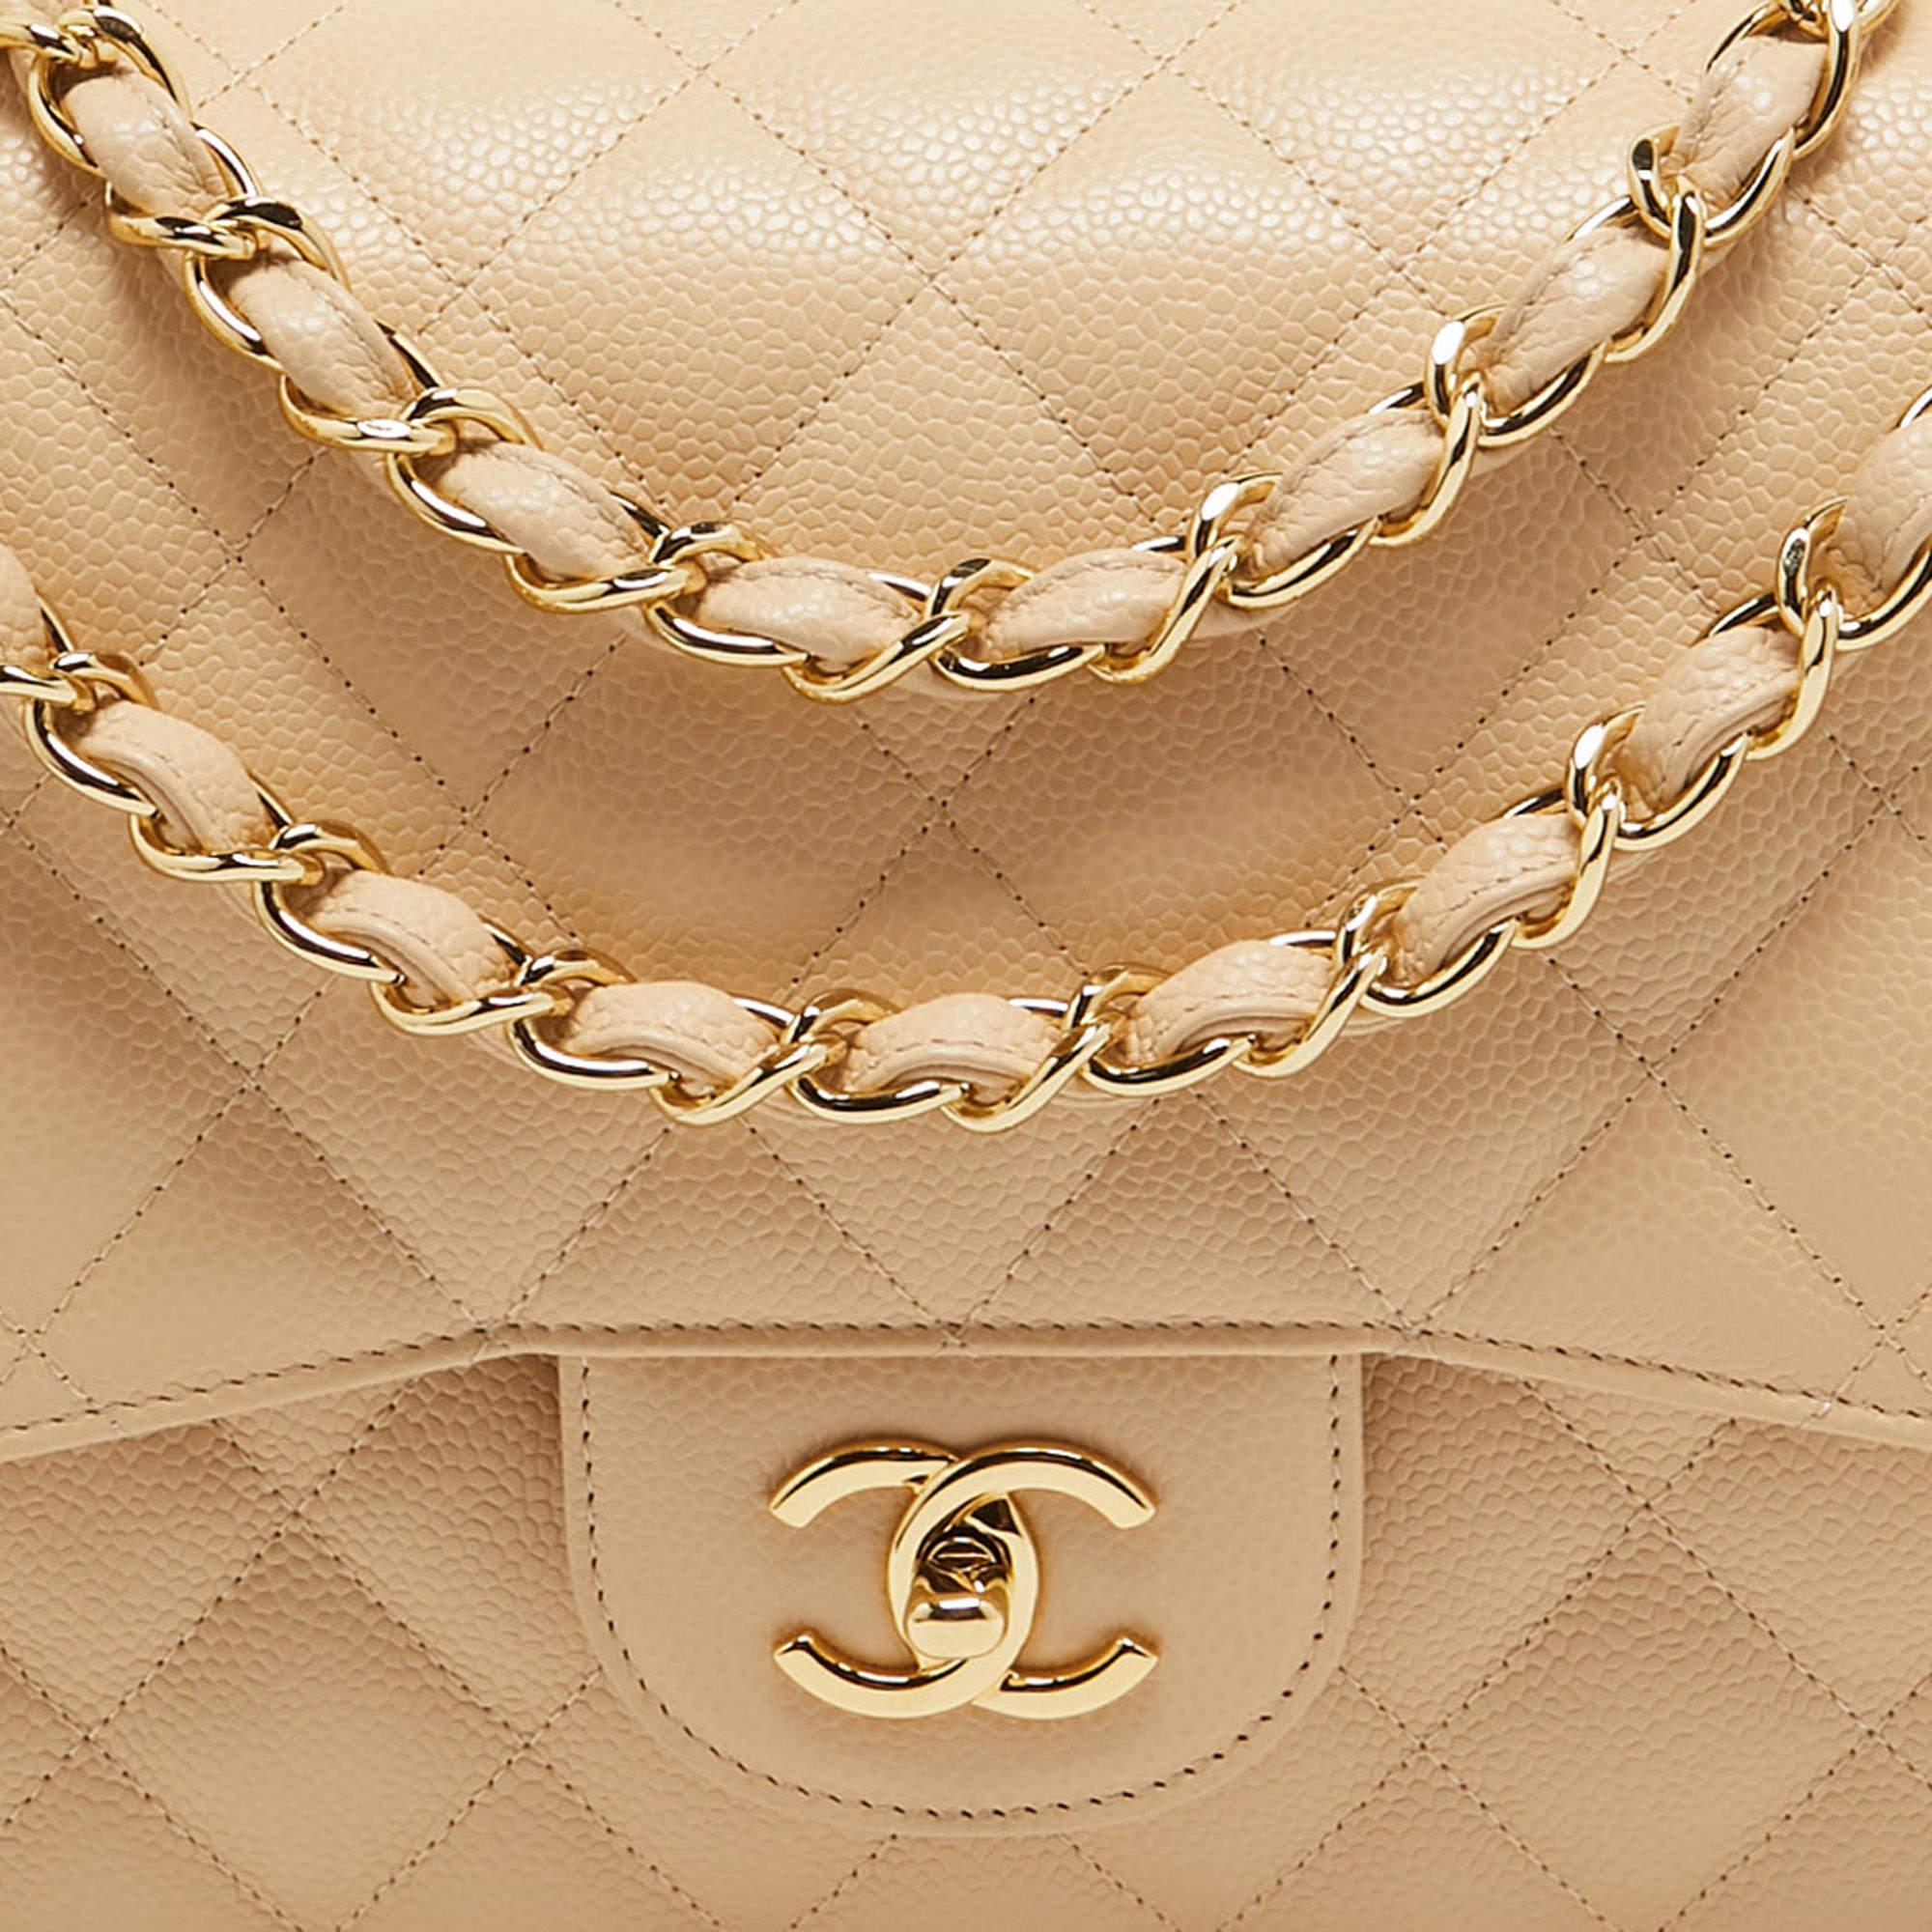 Chanel Light Beige Quilted Caviar Leather Jumbo Classic Double Flap Bag For Sale 6